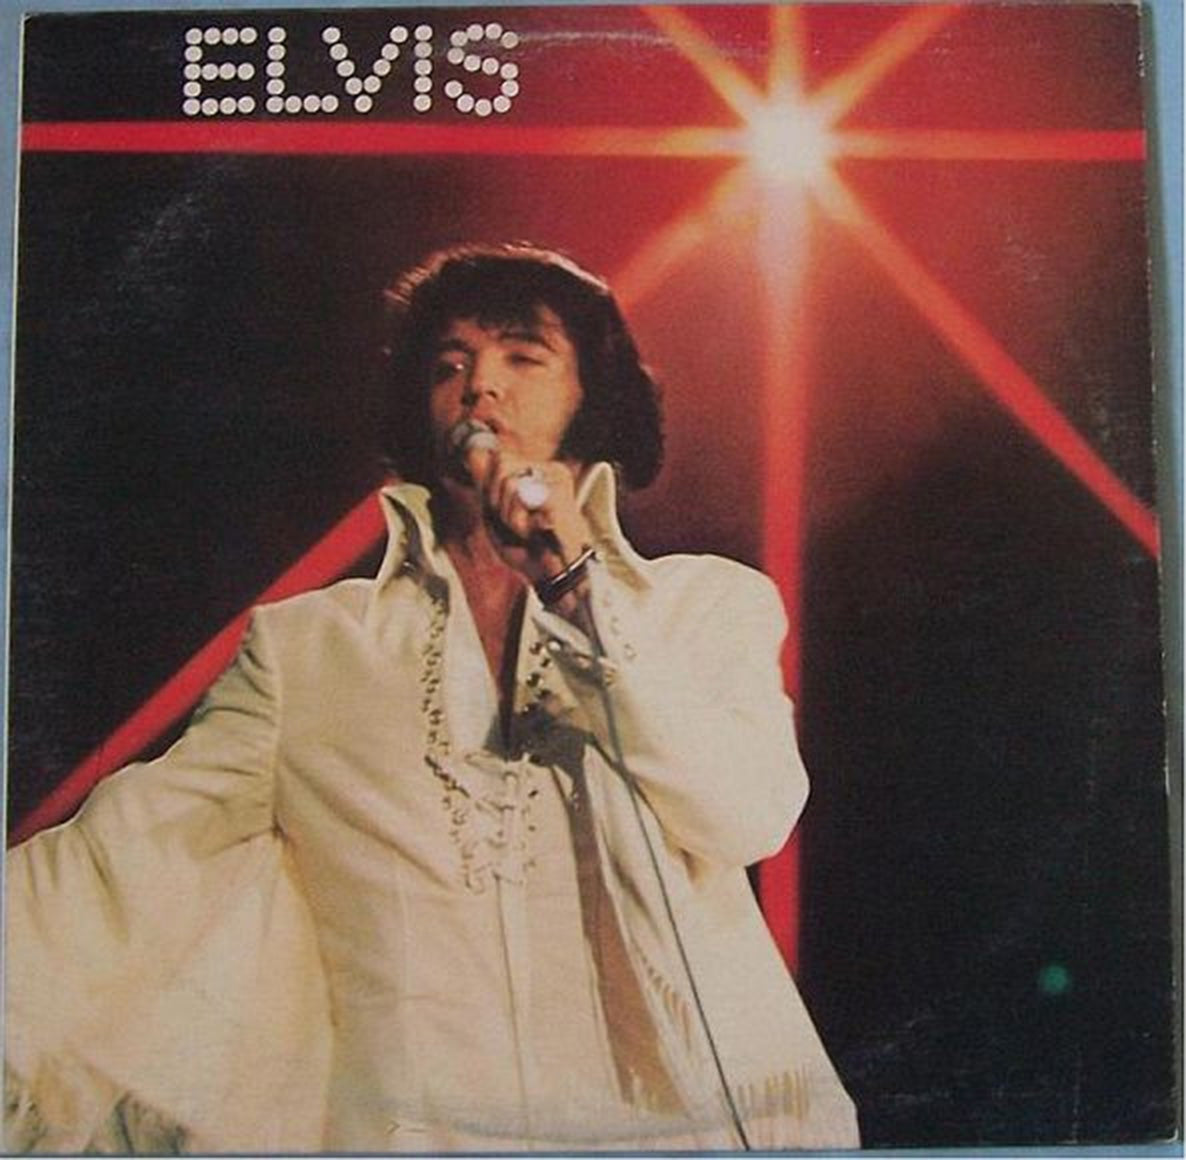 Elvis – You'll Never Walk Alone